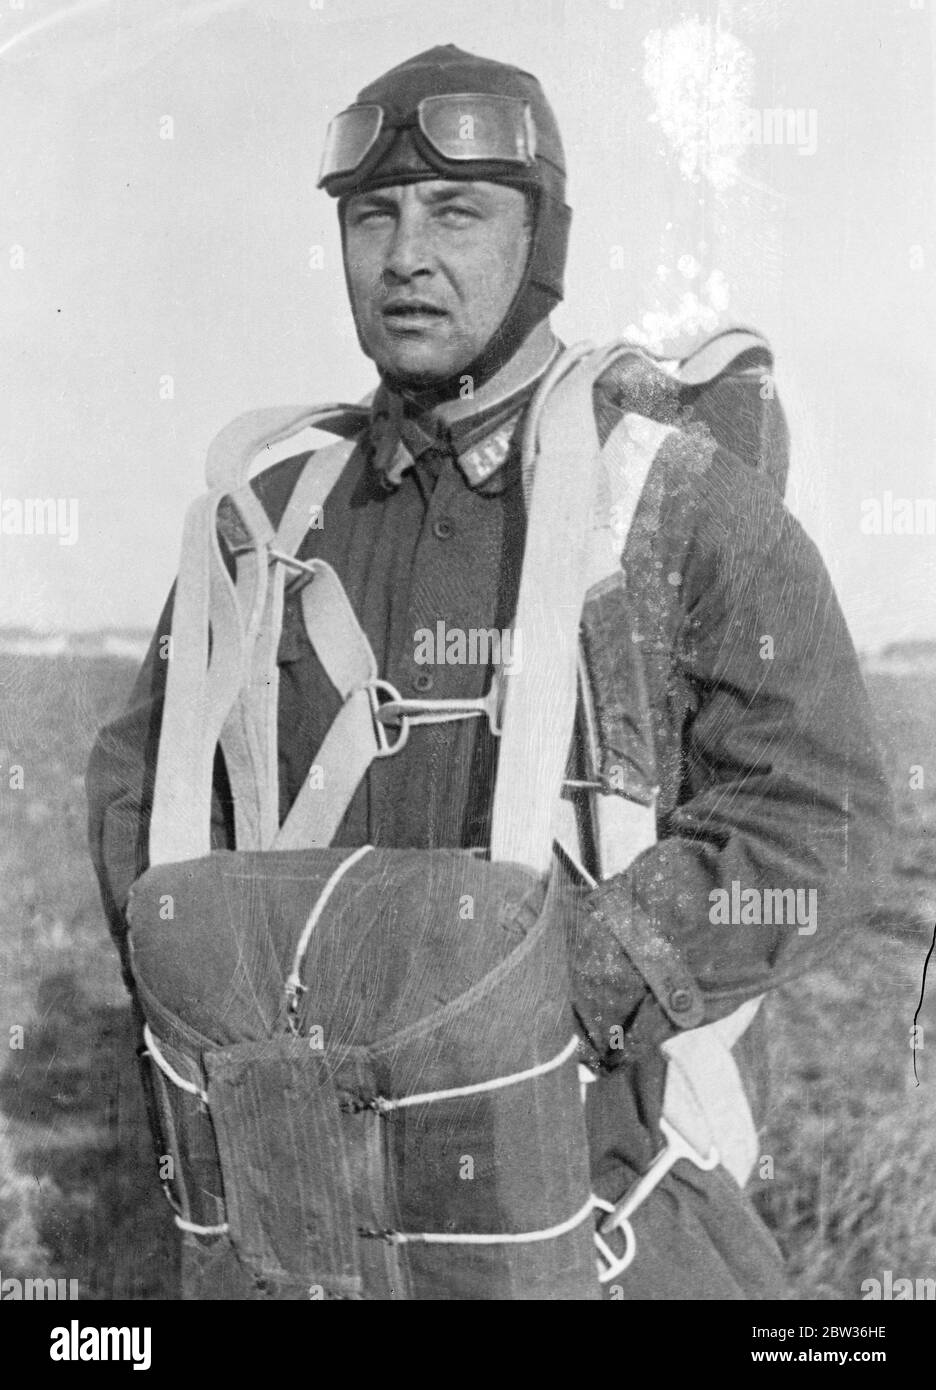 Russia claims world parachute record . The Russian parachute jumper Sabelin , who is claimed by the Soviet Government to have established a new world record , photographed on the Moscow aerodrome before going up for one of the spectacular leaps that have made him a national hero . 23 August 1933 Stock Photo